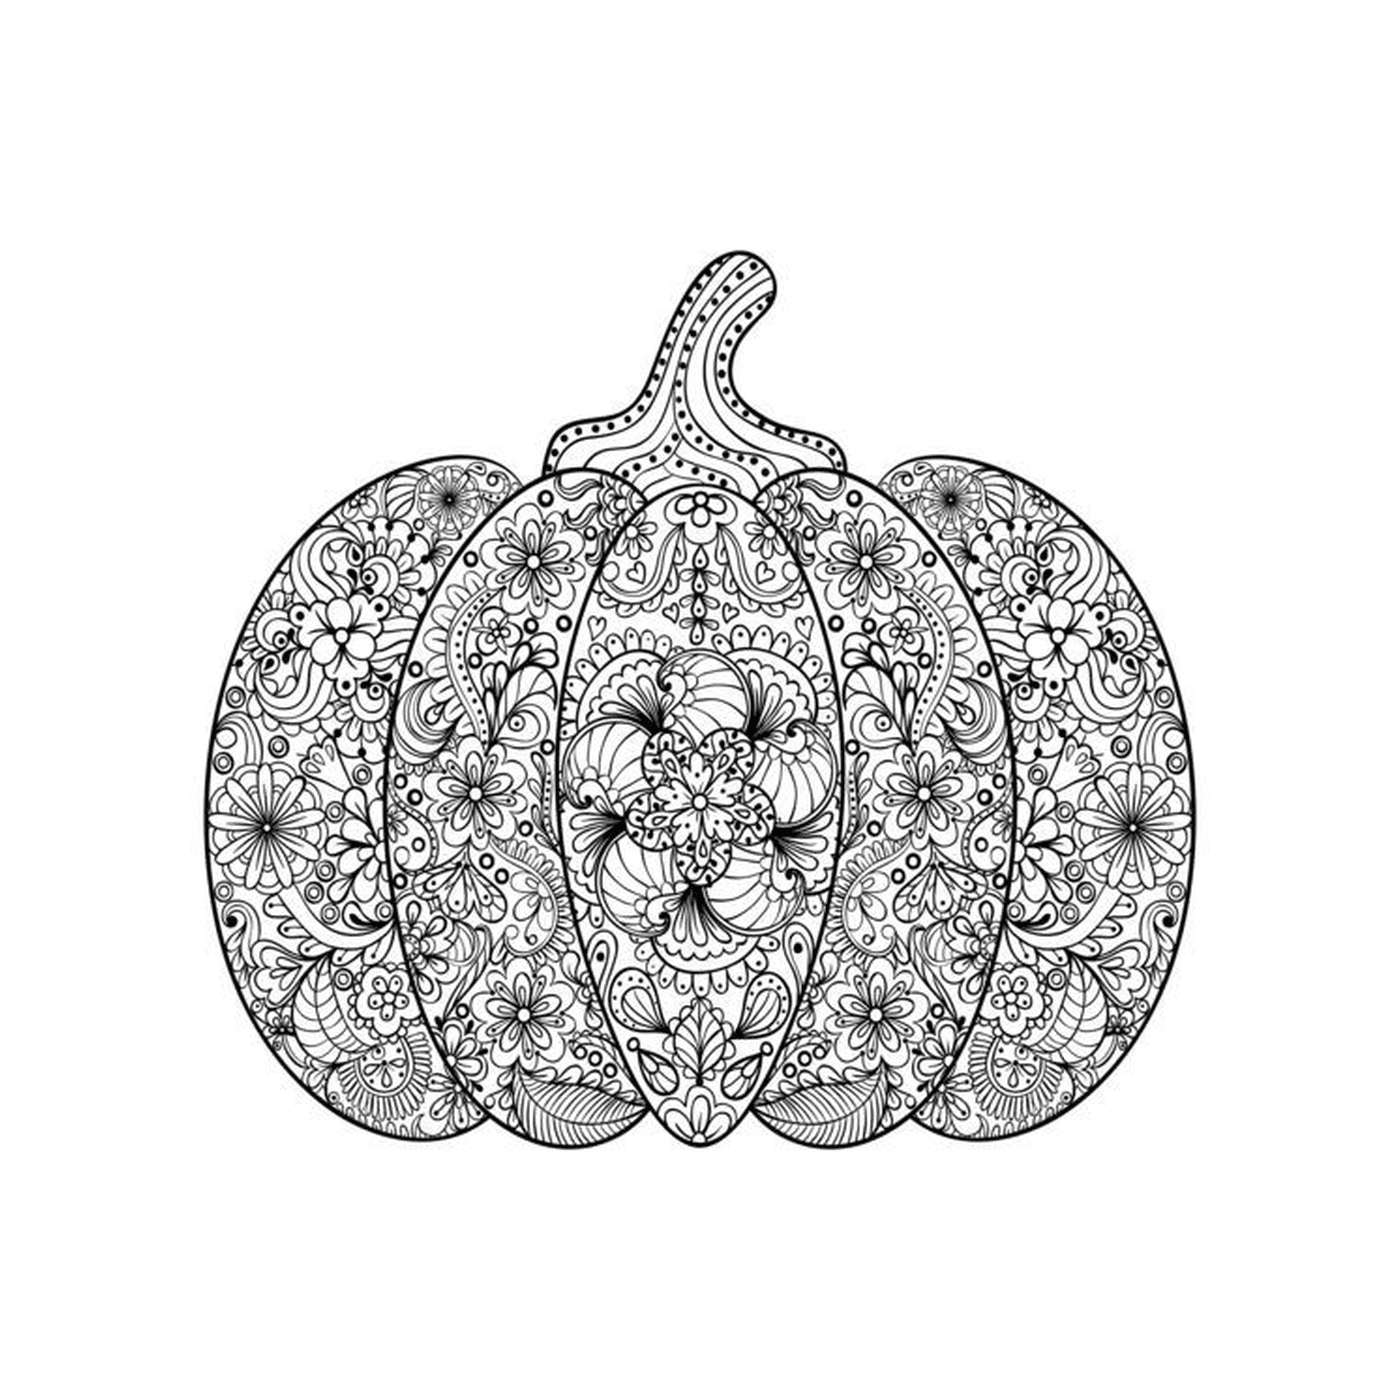  Large pumpkin with complex drawings 